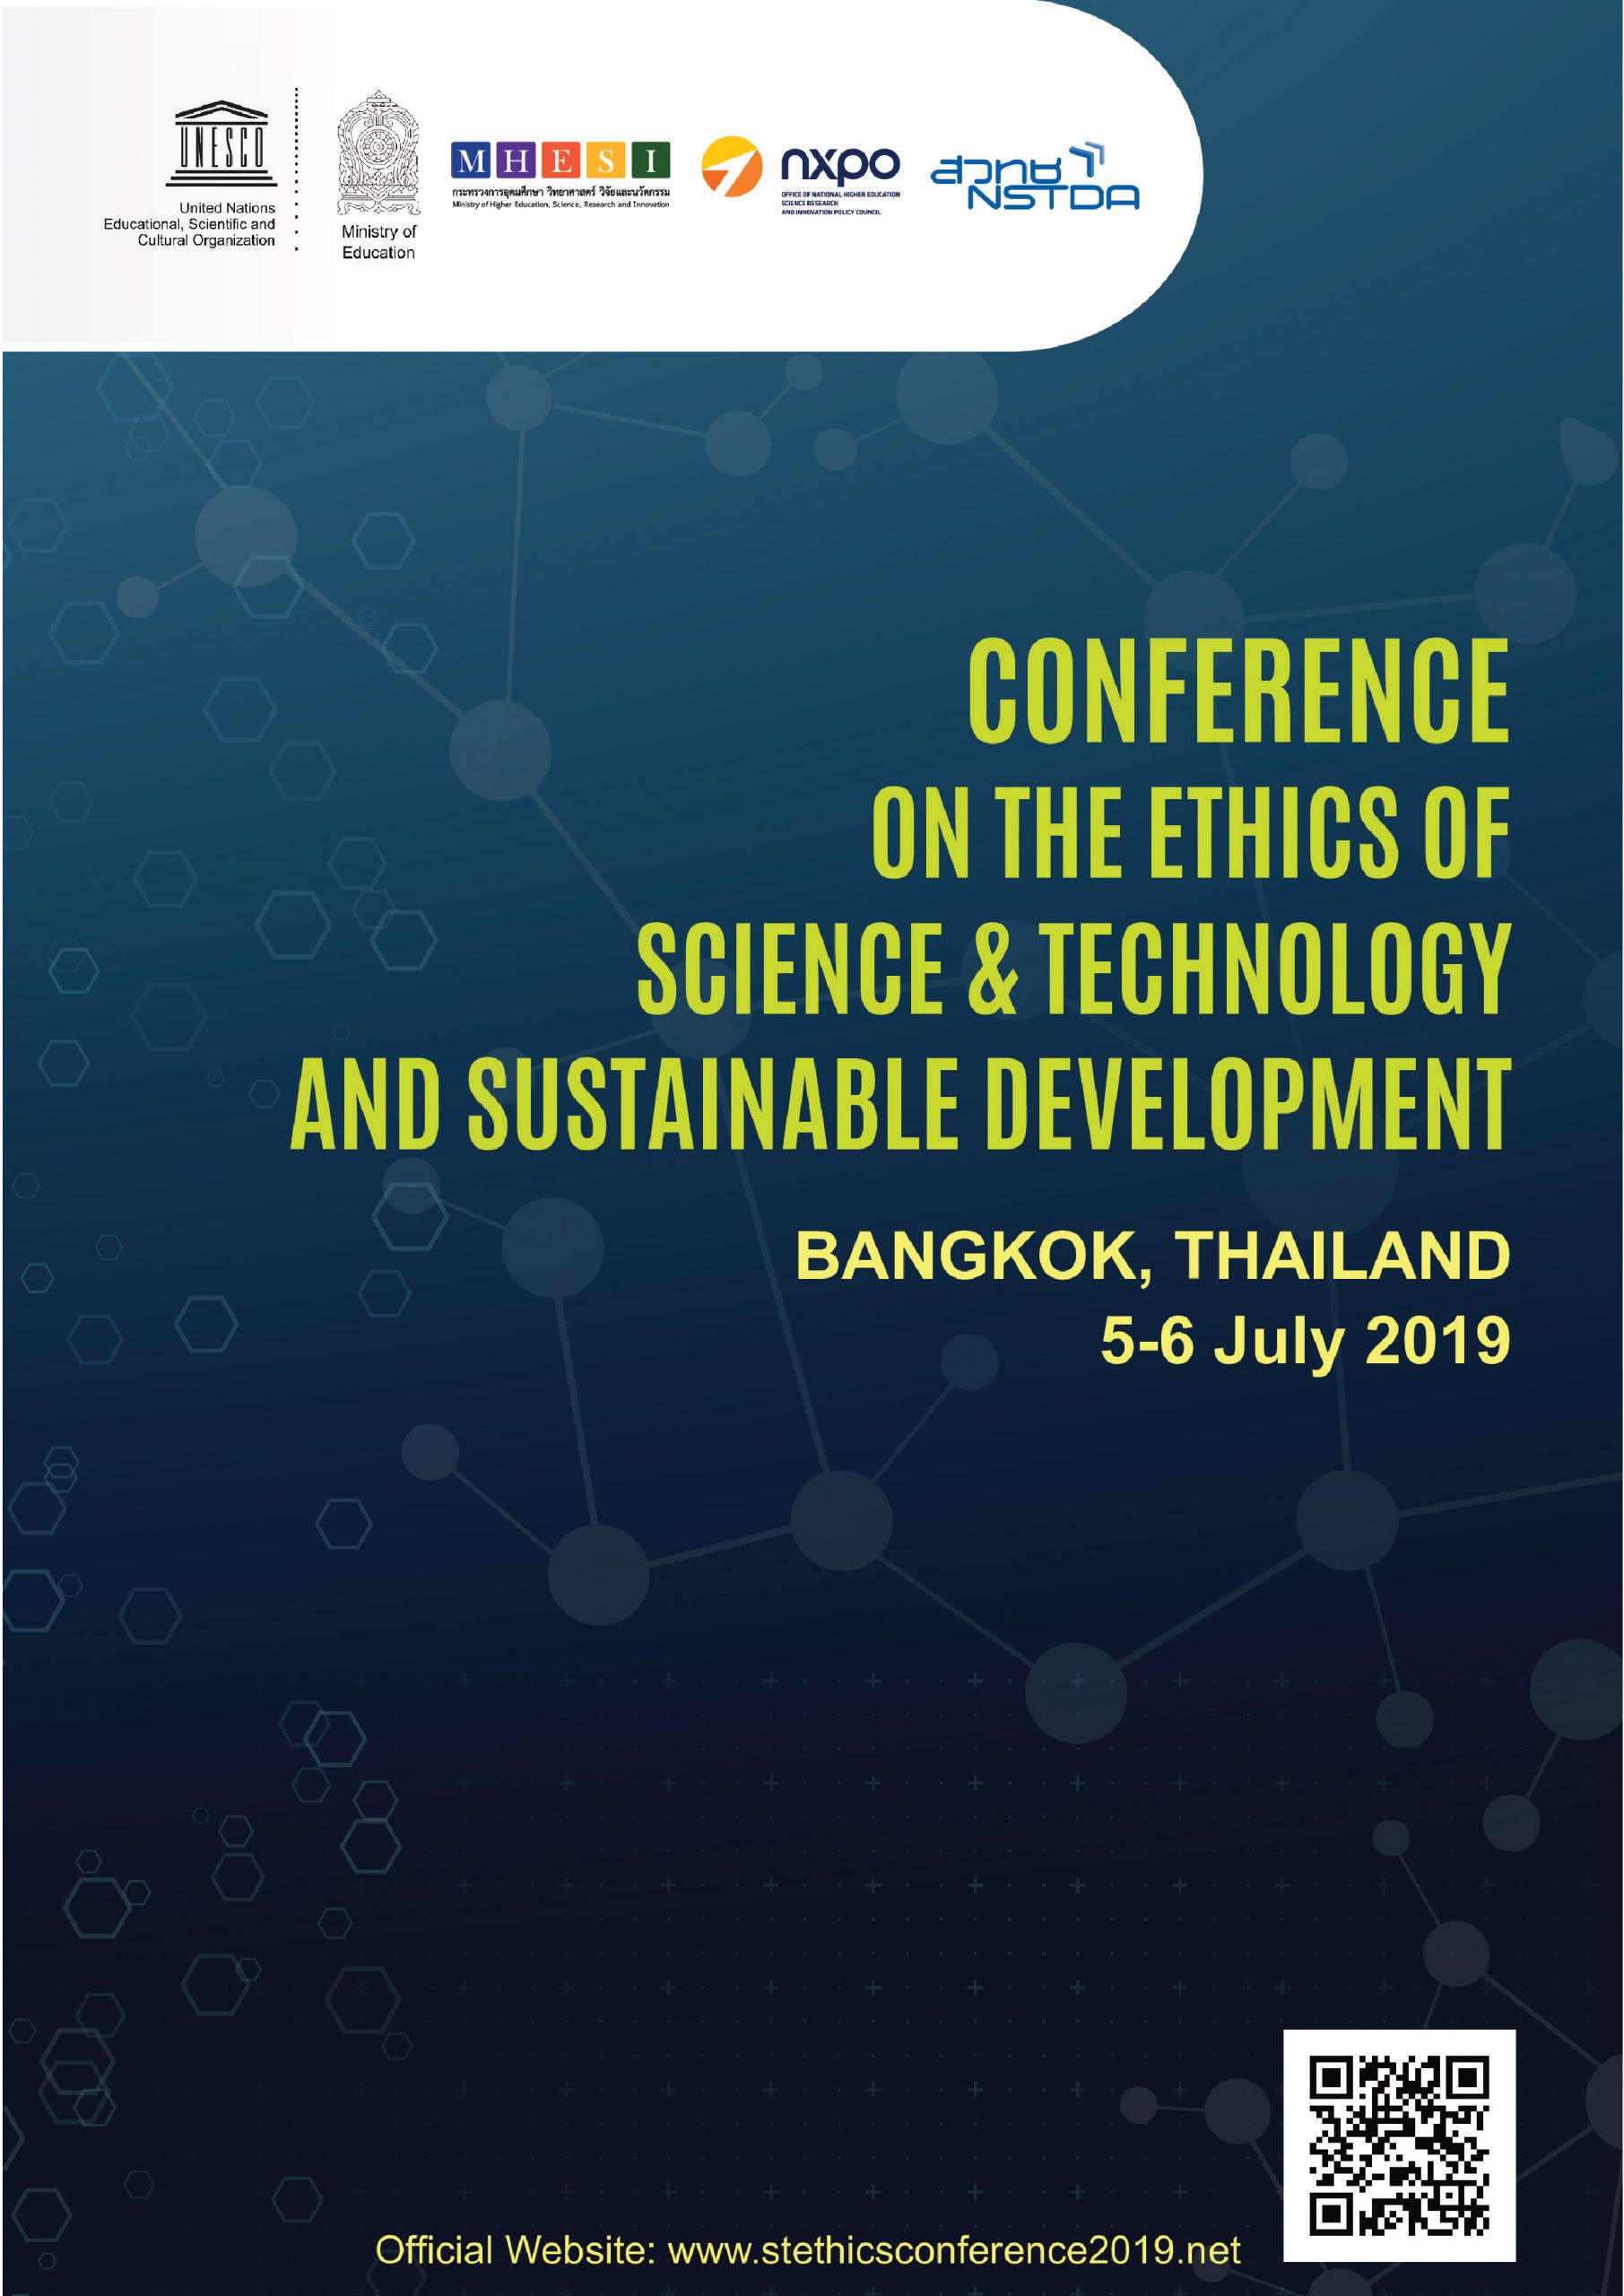 CONFERENCE ON THE ETHICS OF SCIENCE & TECHNOLOGY  AND SUSTAINABLE DEVELOPMENT